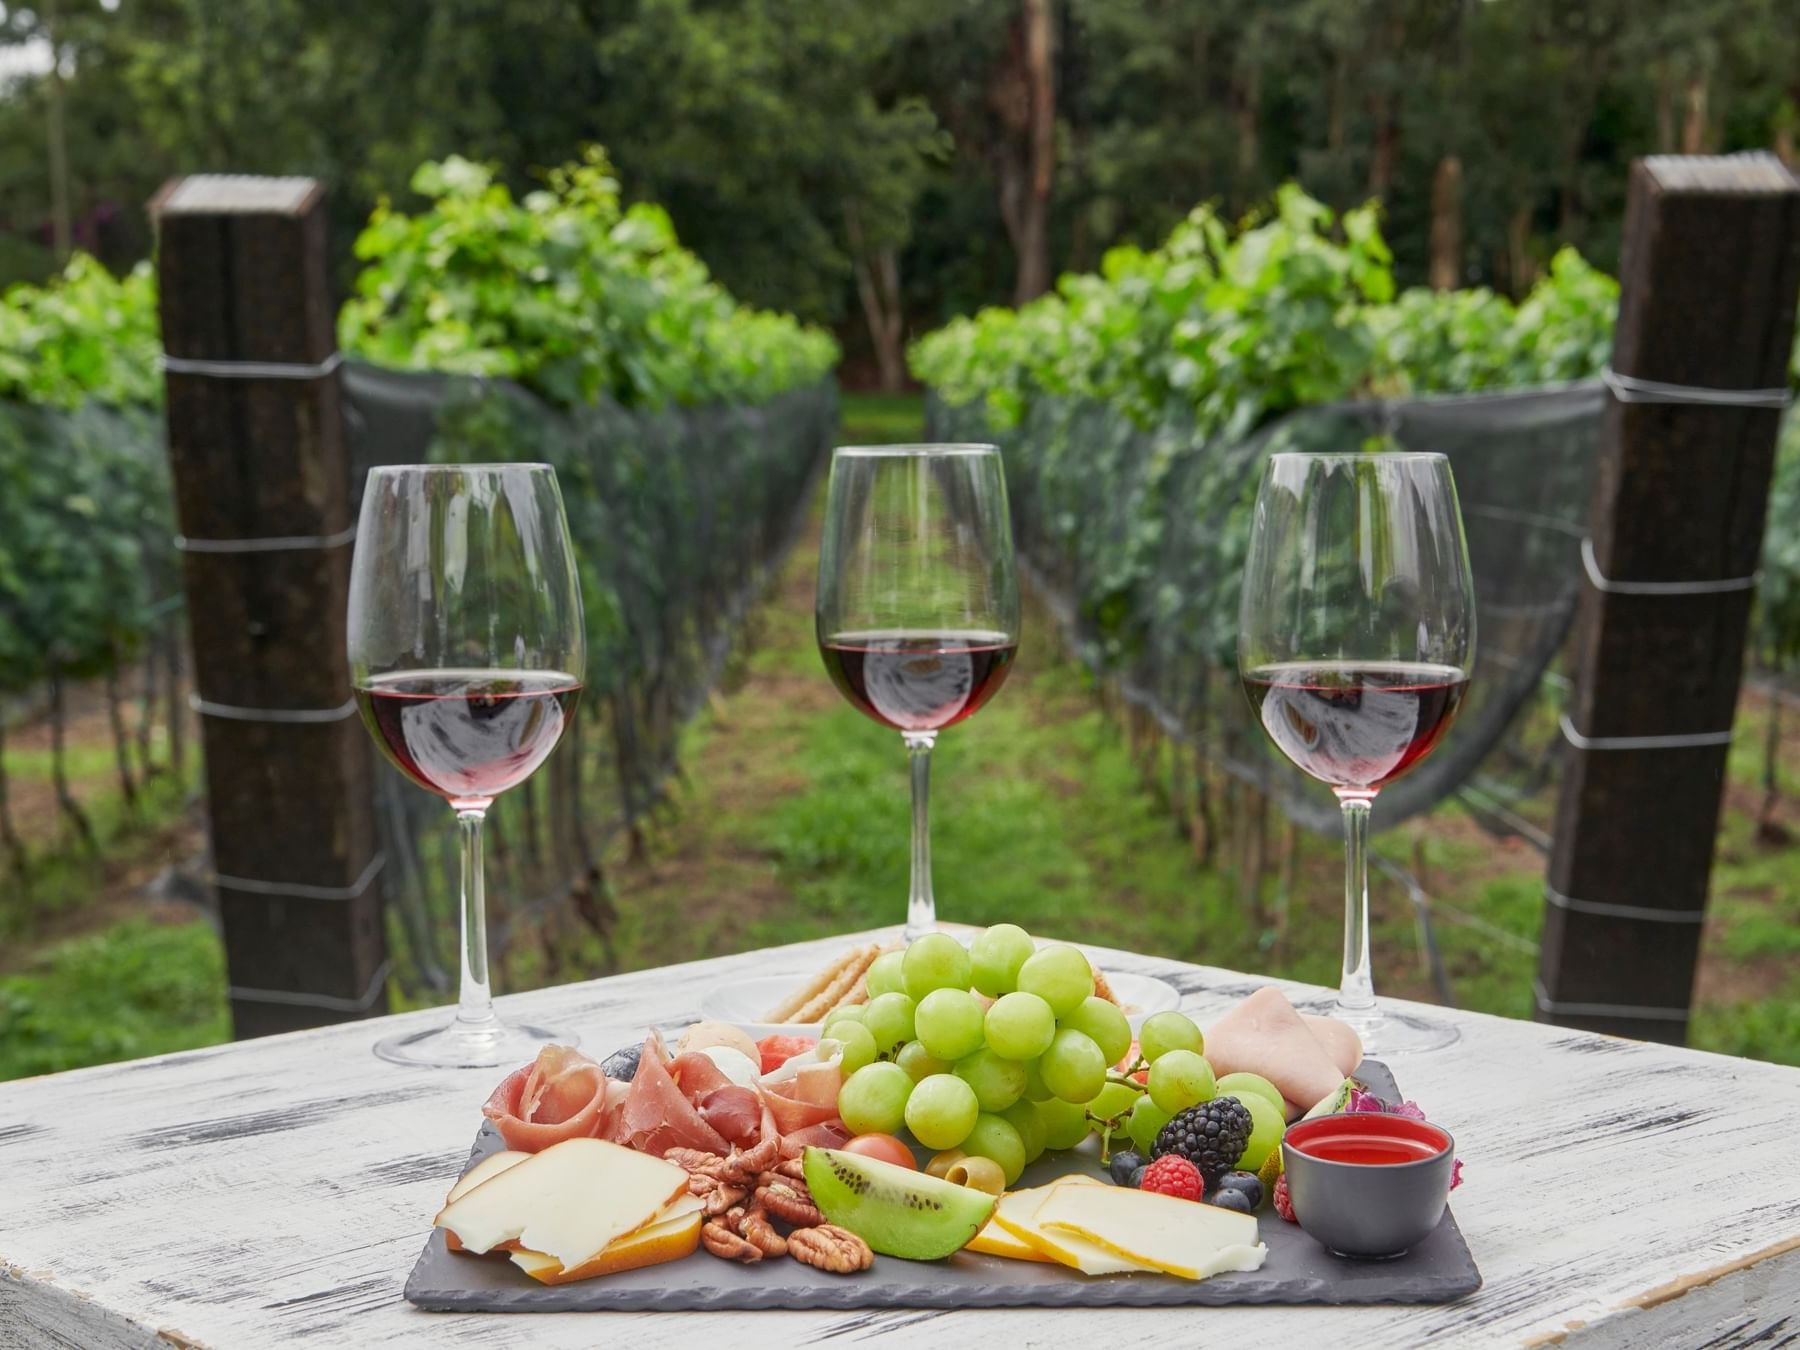 A platter & wine served by a vineyard near La Colección Resorts